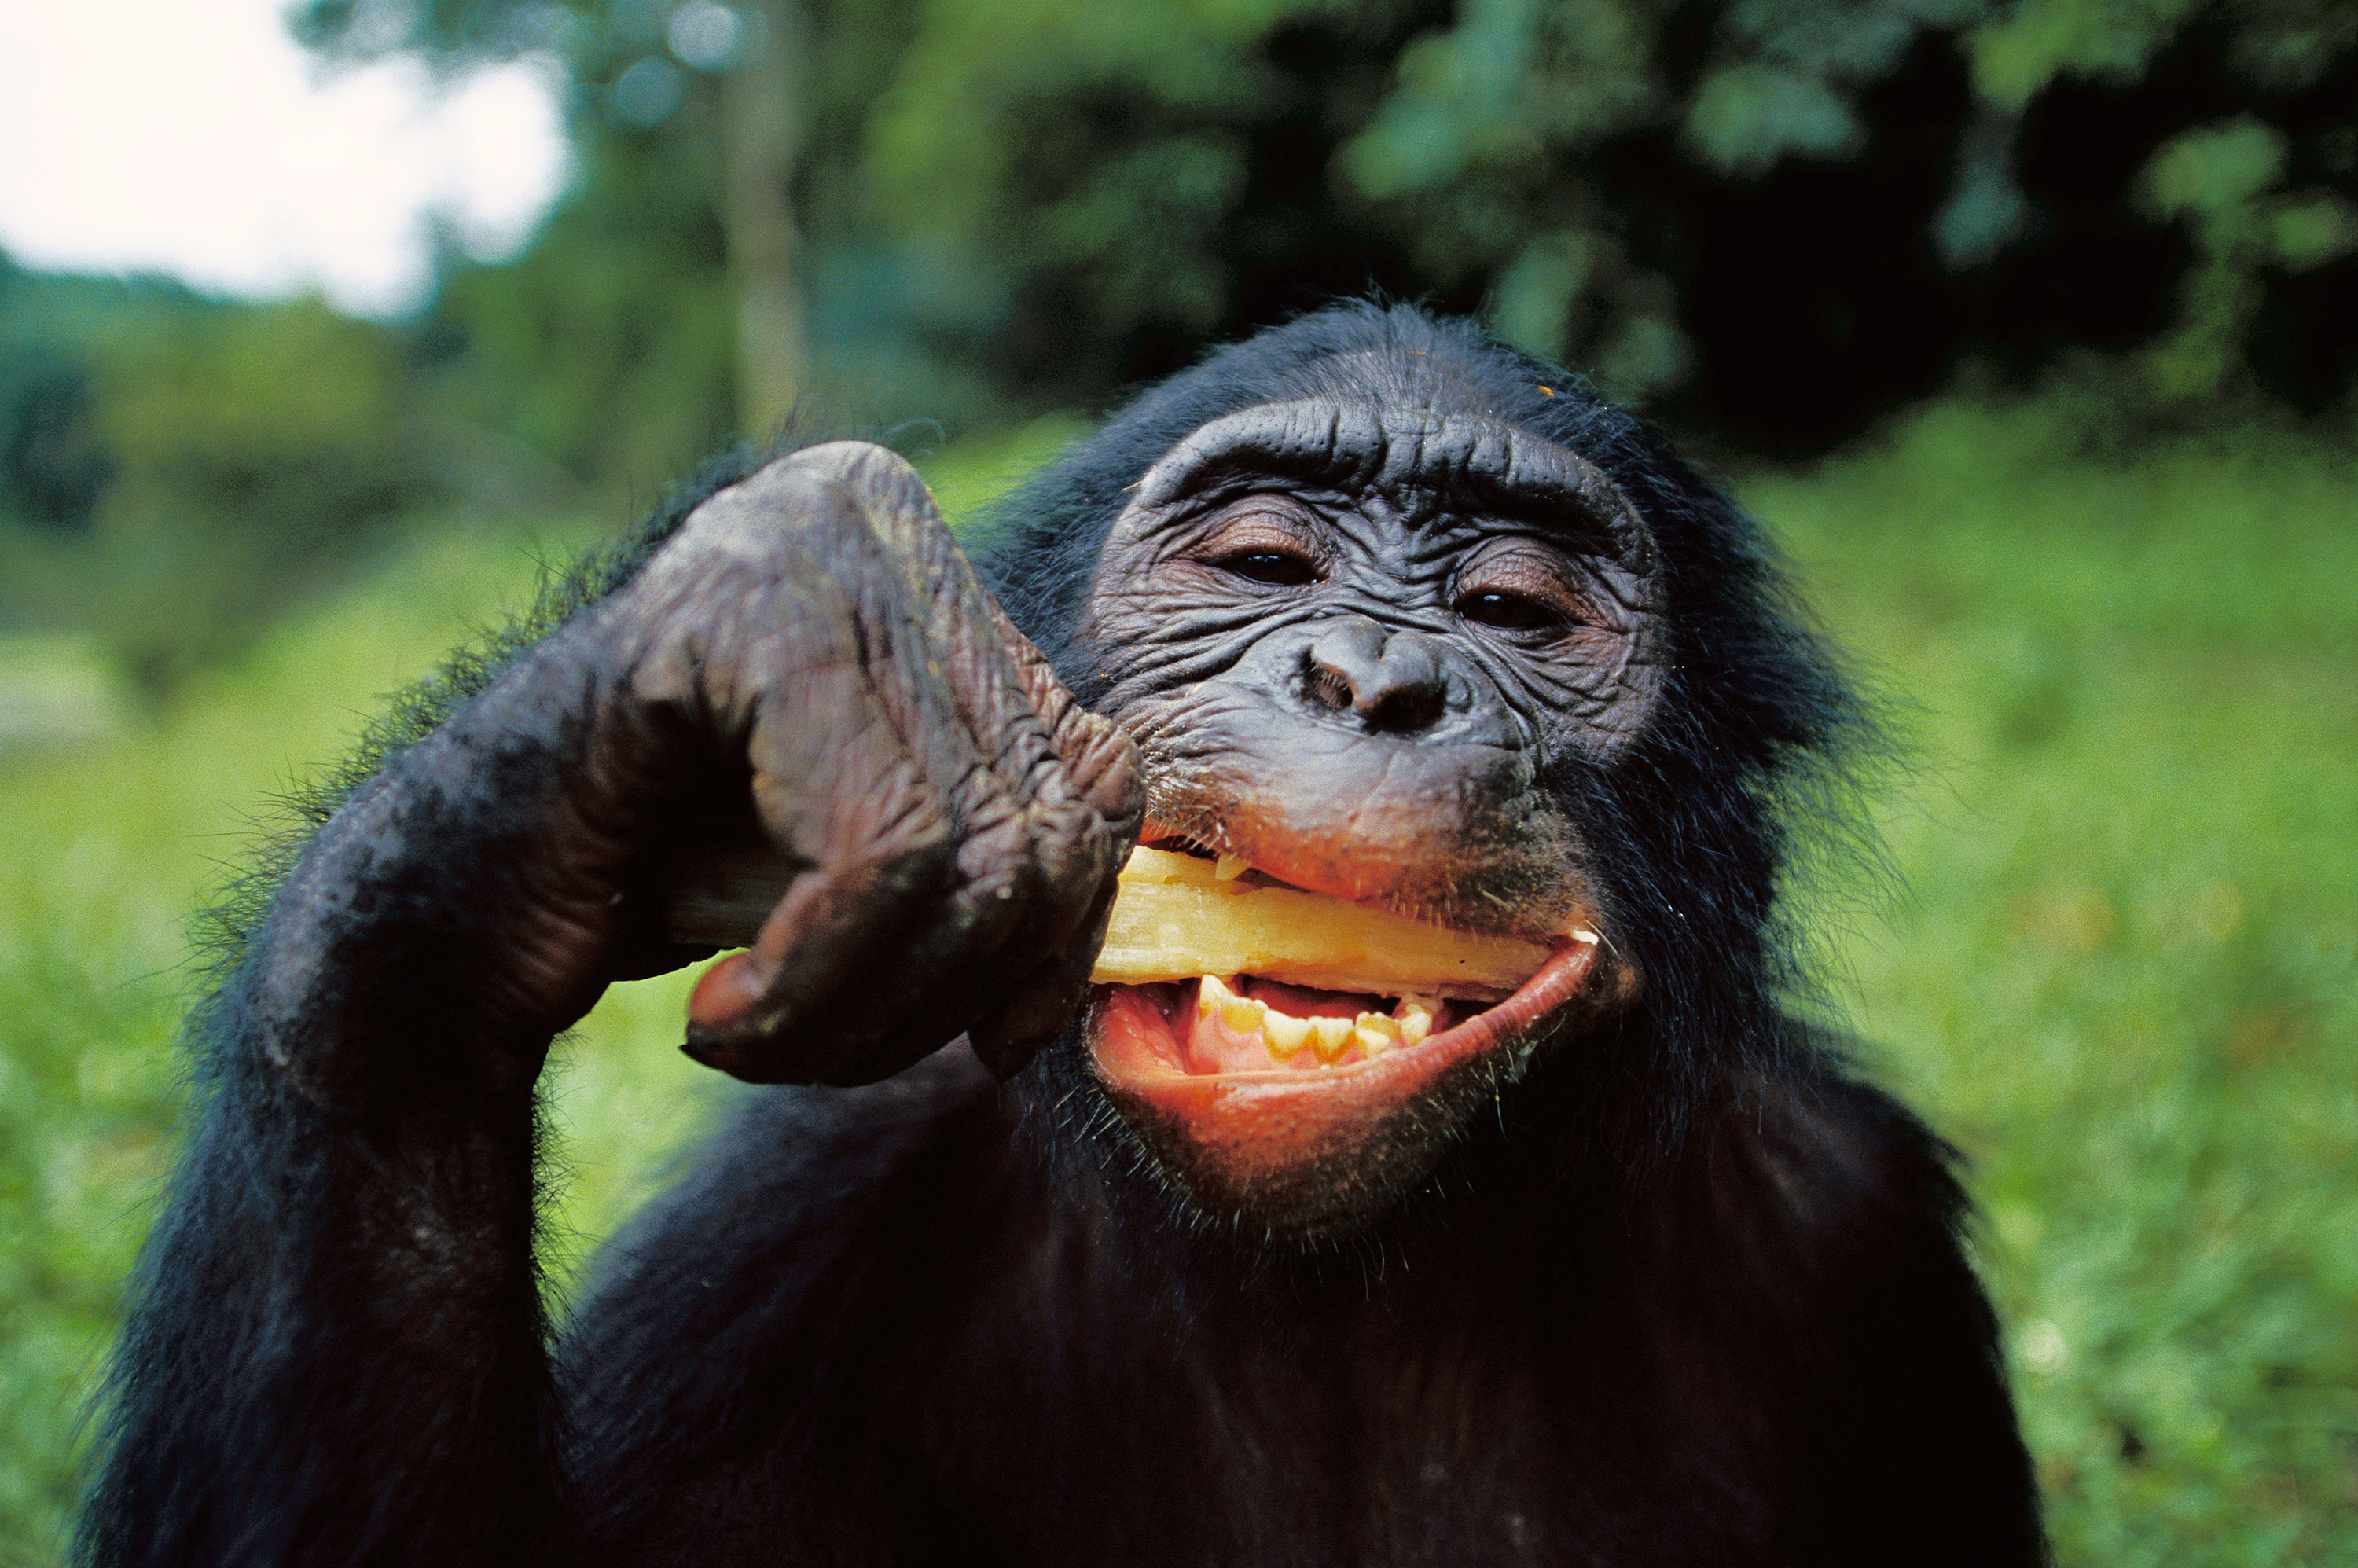 Chimps Can't Cook, But Maybe They'd Like To